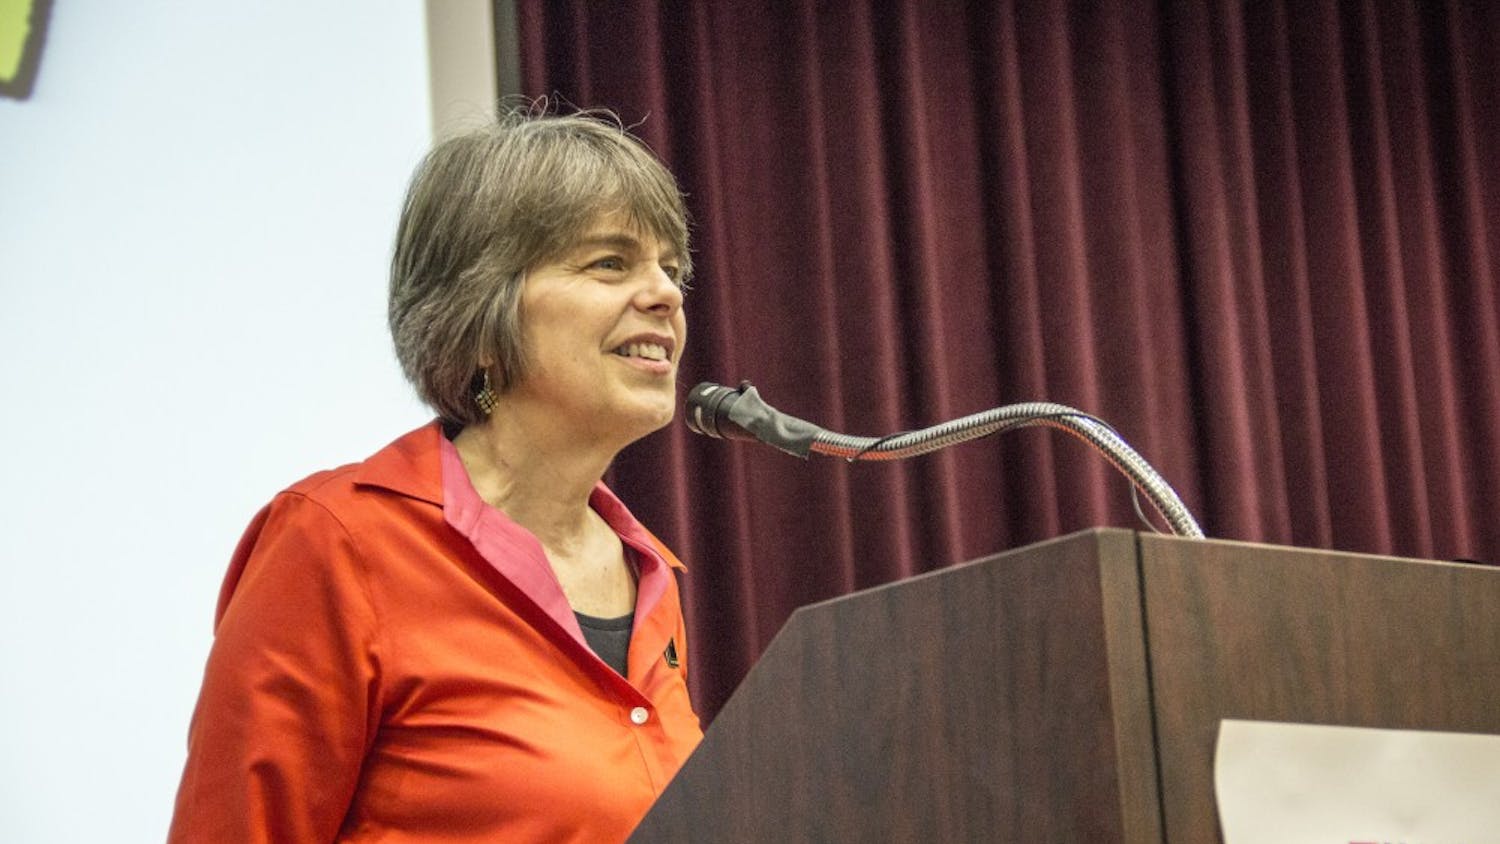 	Mary Beth Tinker, whose landmark Supreme Court win secured First Amendment rights for students, speaks to high school journalists at a South Carolina Scholastic Press Association conference Monday.